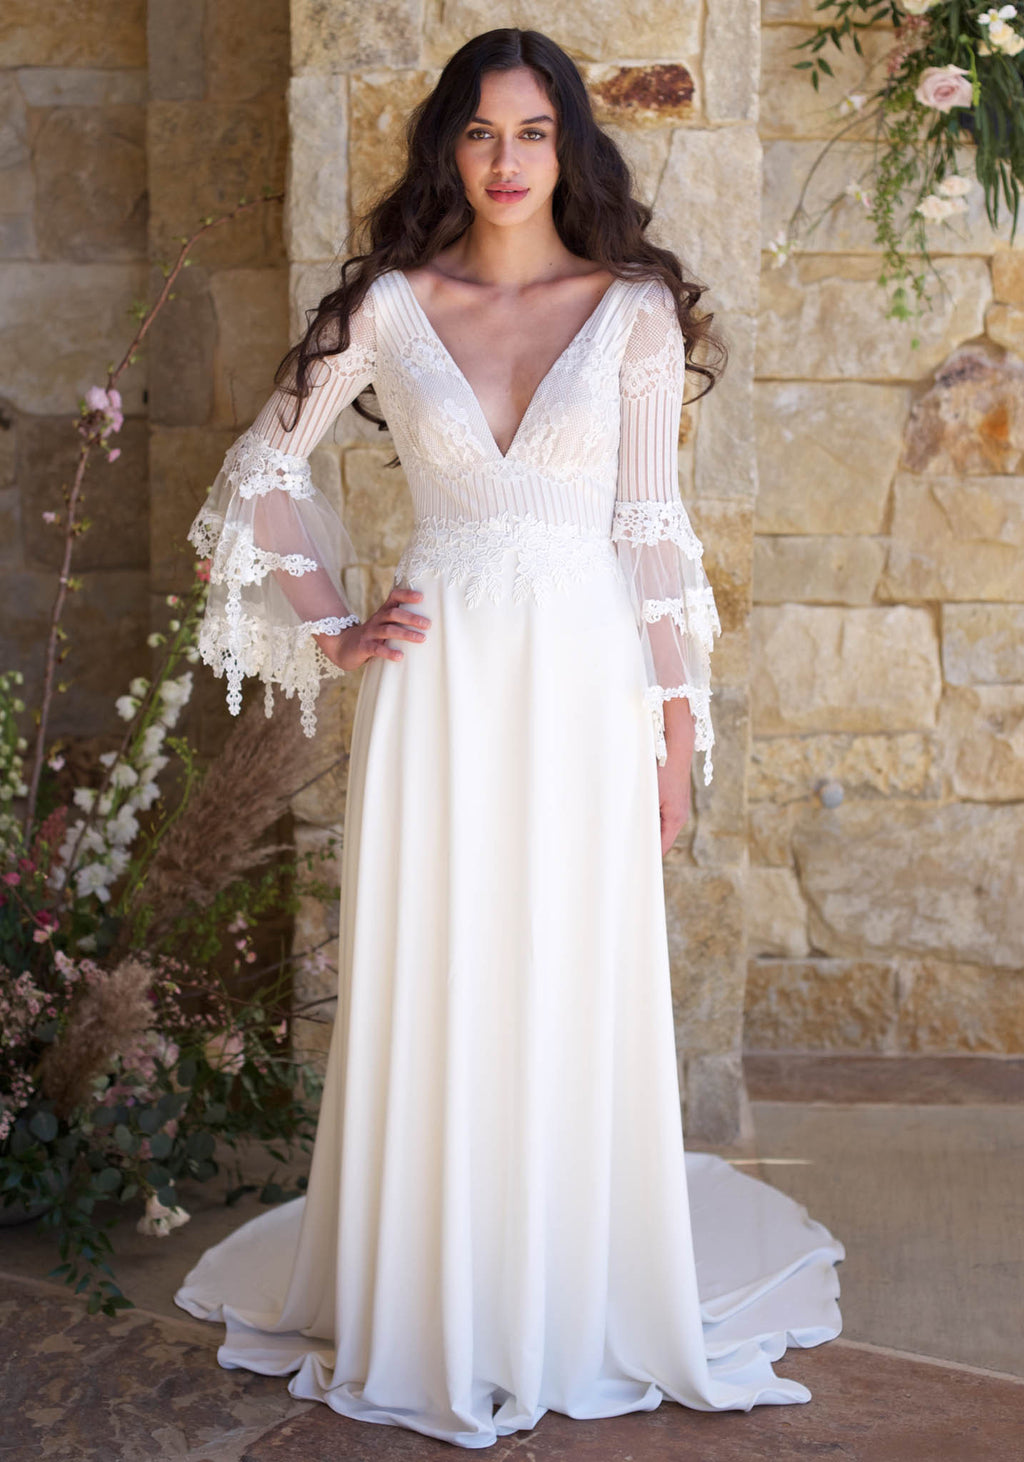 Long Sleeve Wedding Dress from Claire Pettibones Fall 2015 Bridal  Collection - Chic Vintage Brides : Chic Vintage Brides